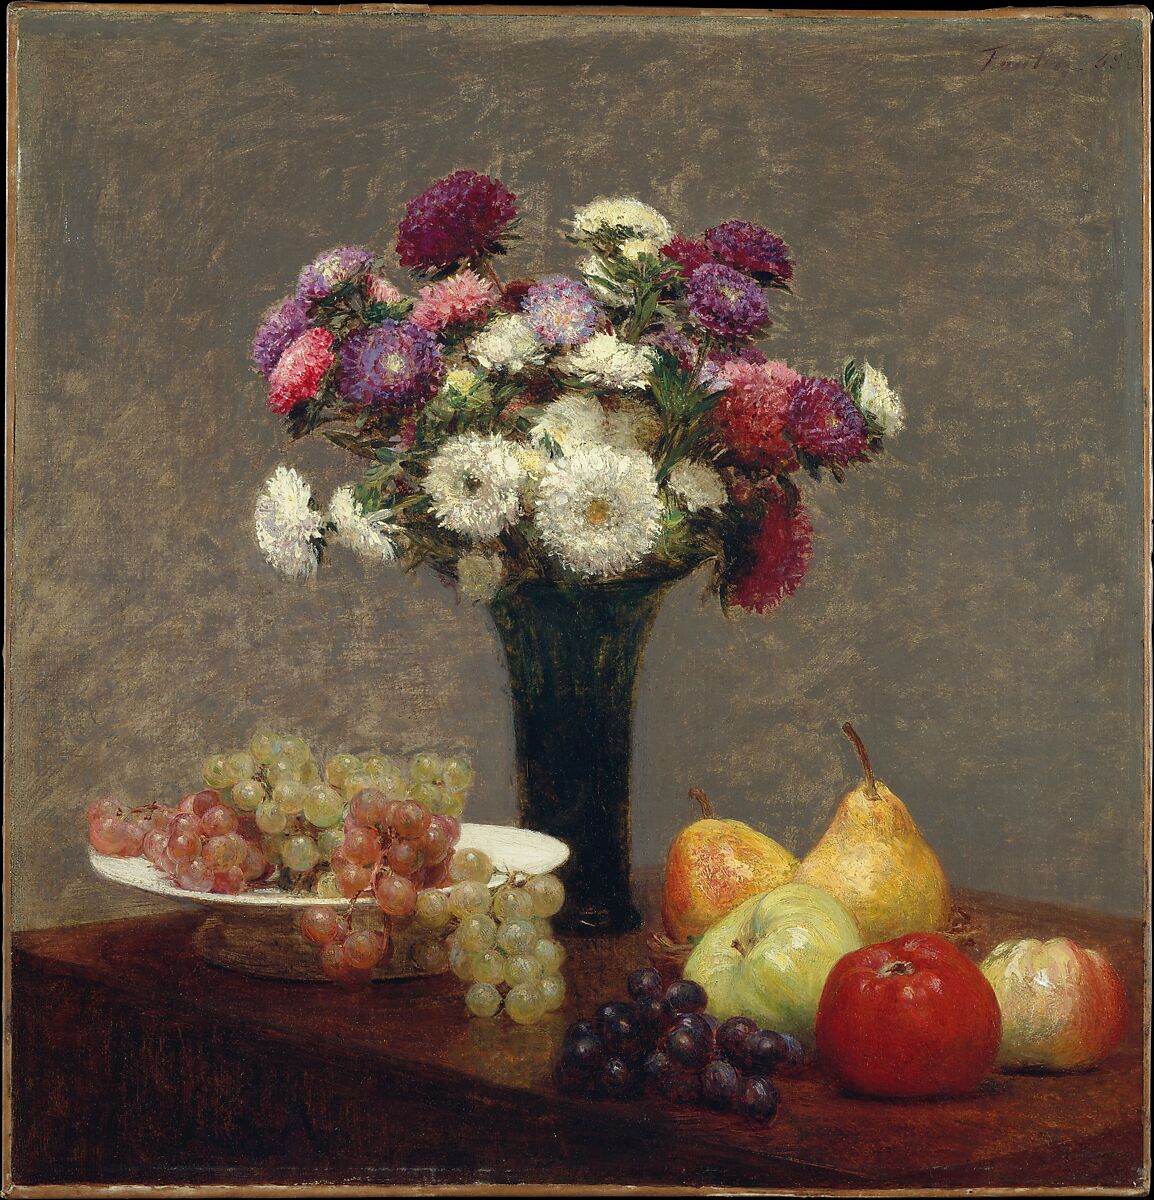 Asters and Fruit on a Table, Henri Fantin-Latour  French, Oil on canvas